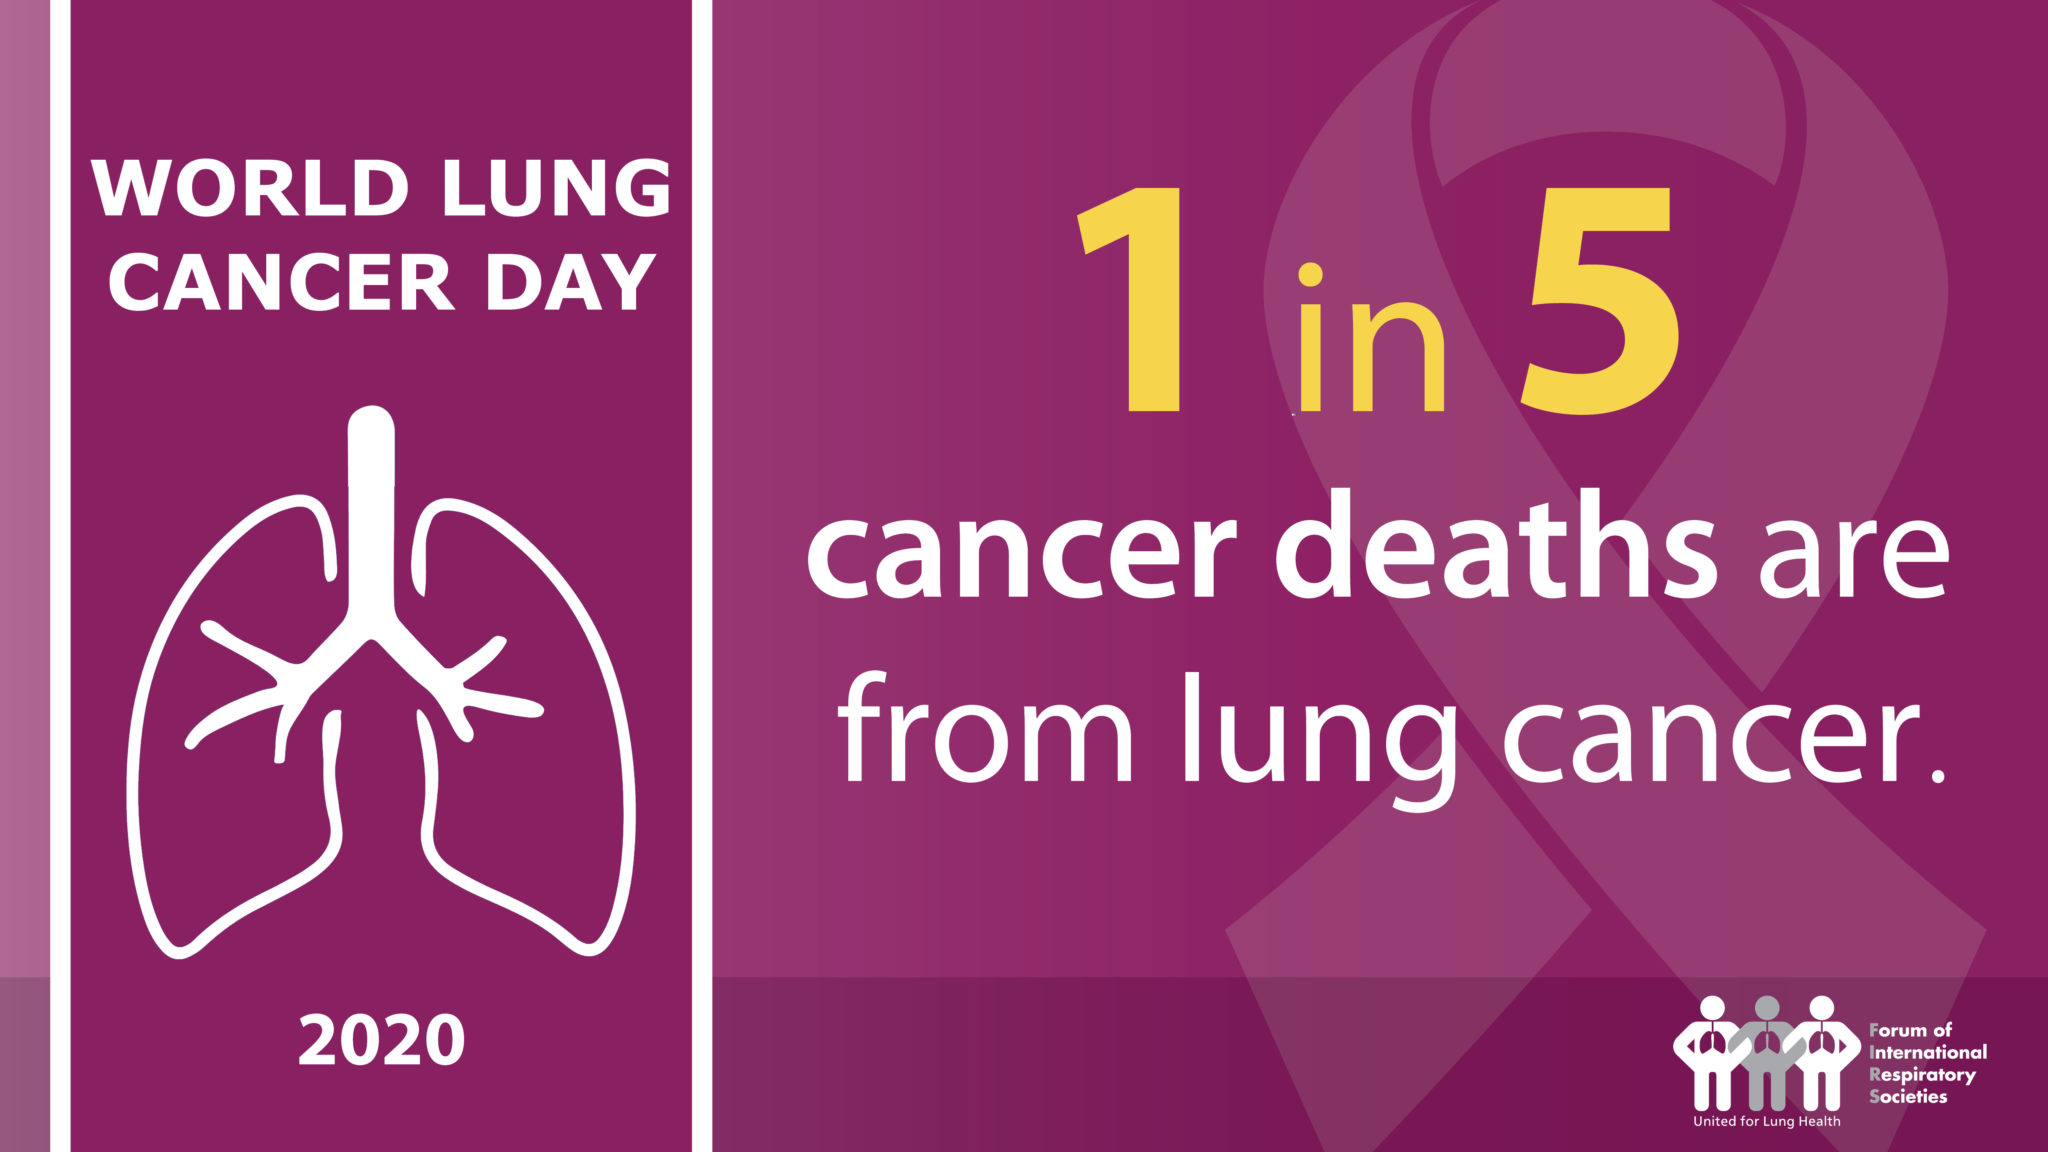 LUNG CANCER DAY 2020 FIRS4 Global Initiative for Chronic Obstructive